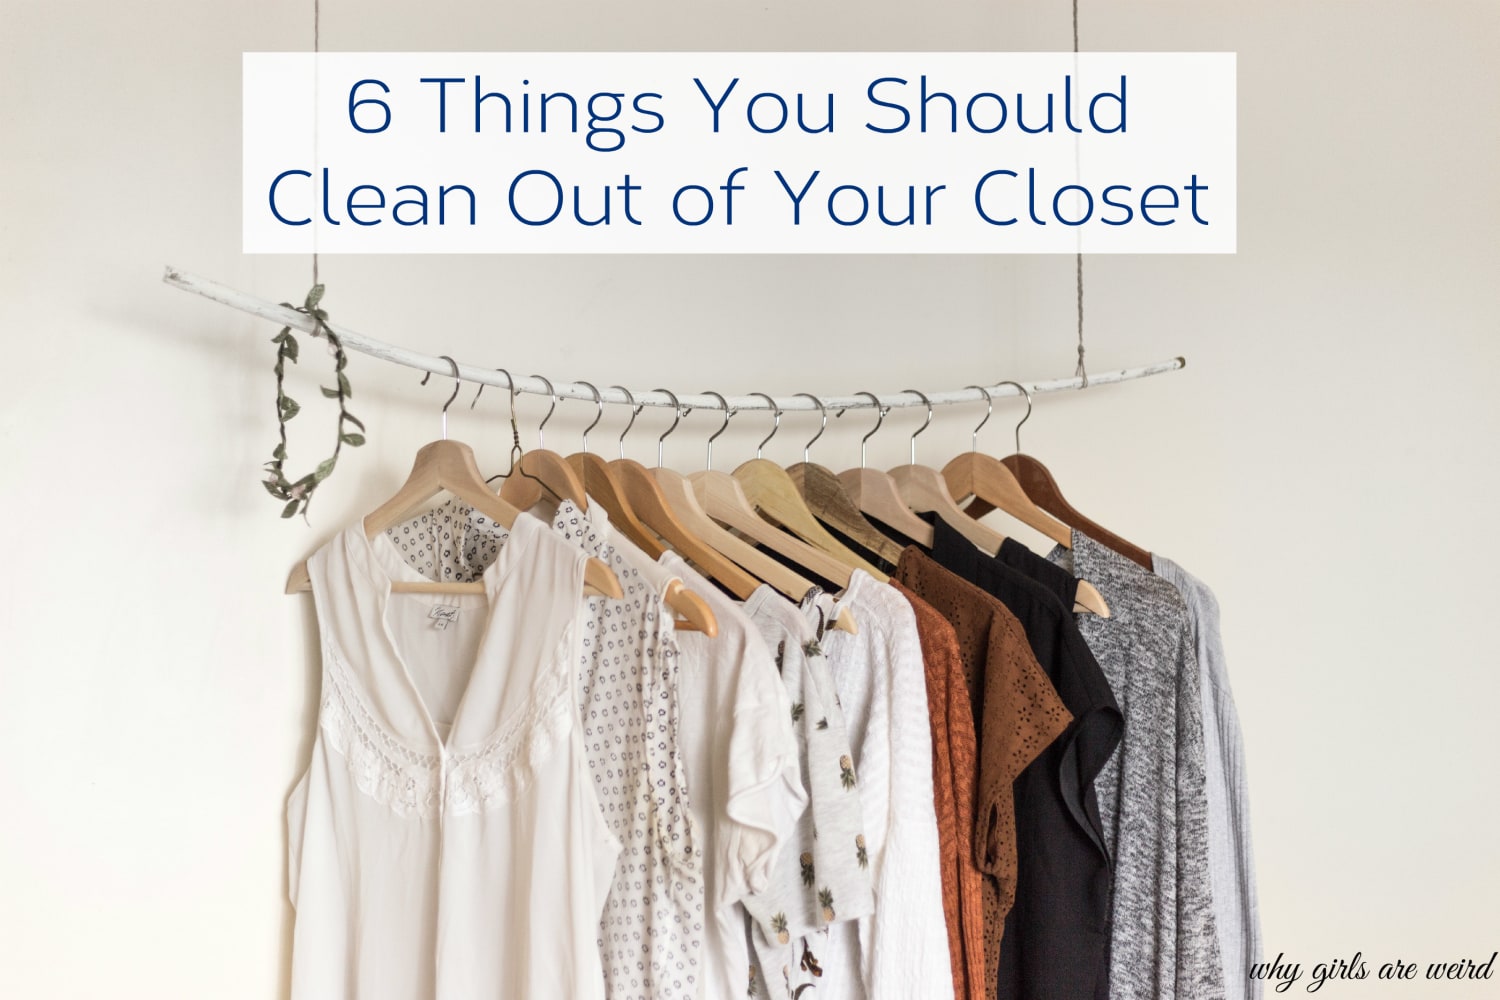 6 Things You Should Clean Out of Your Closet